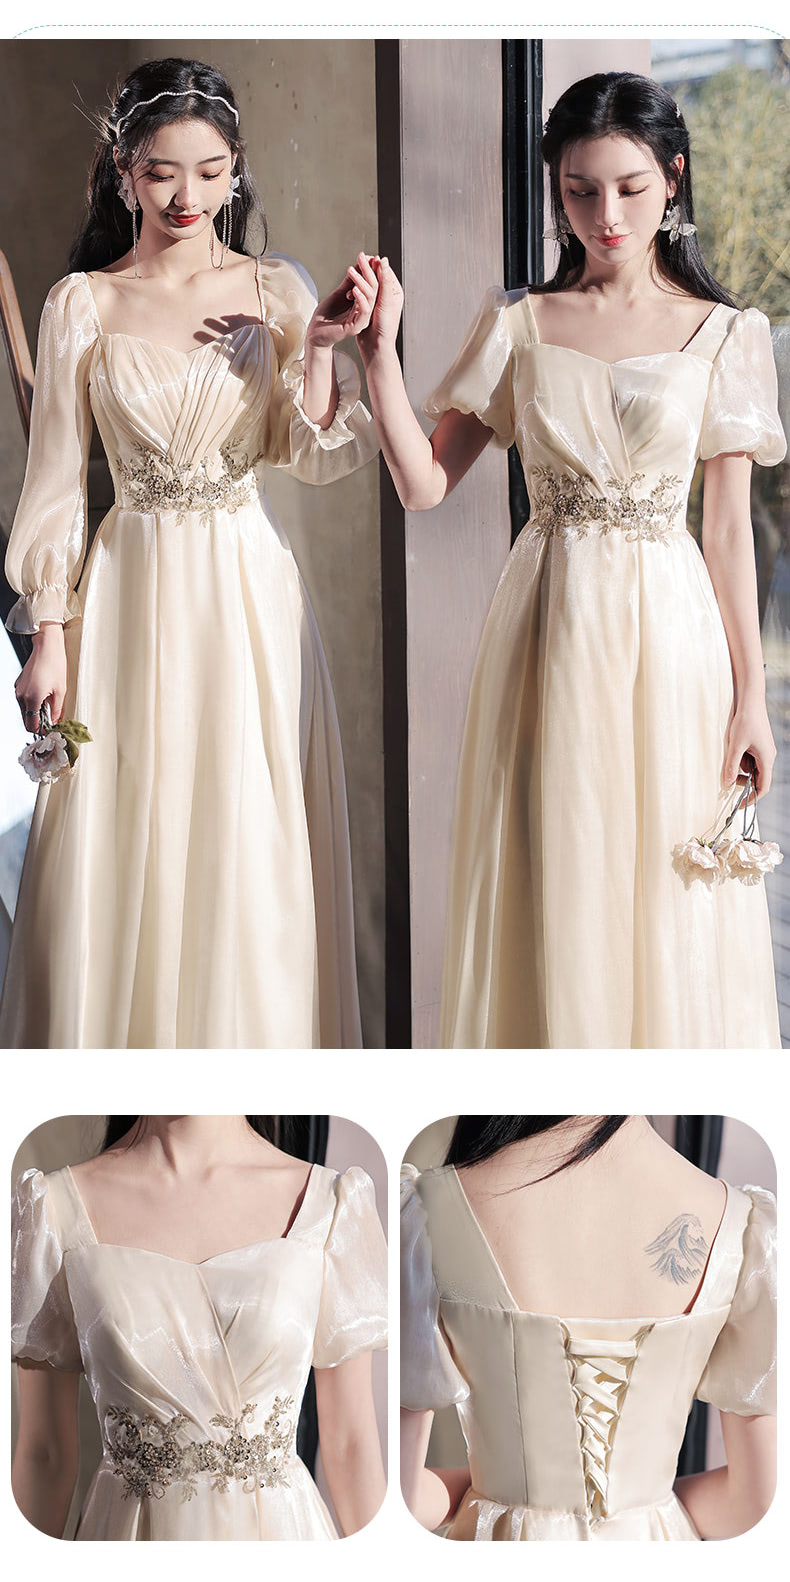 Sweet-Glossy-Champagne-Evening-Gown-Fairy-Bridesmaid-Dress17.jpg